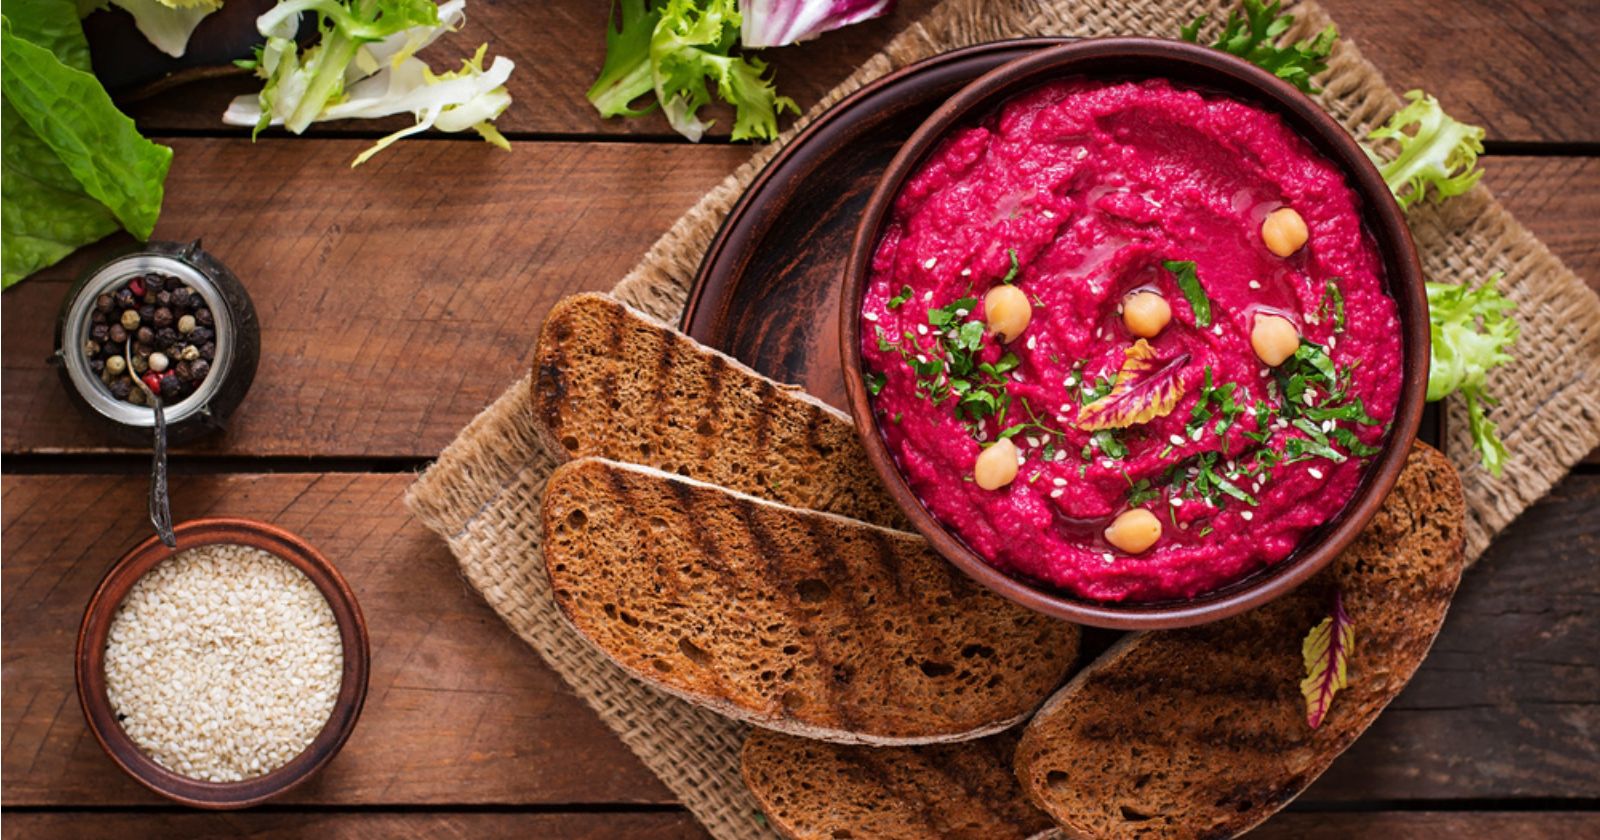 Beets, white beans, carrots: 3 alternatives to chickpea hummus